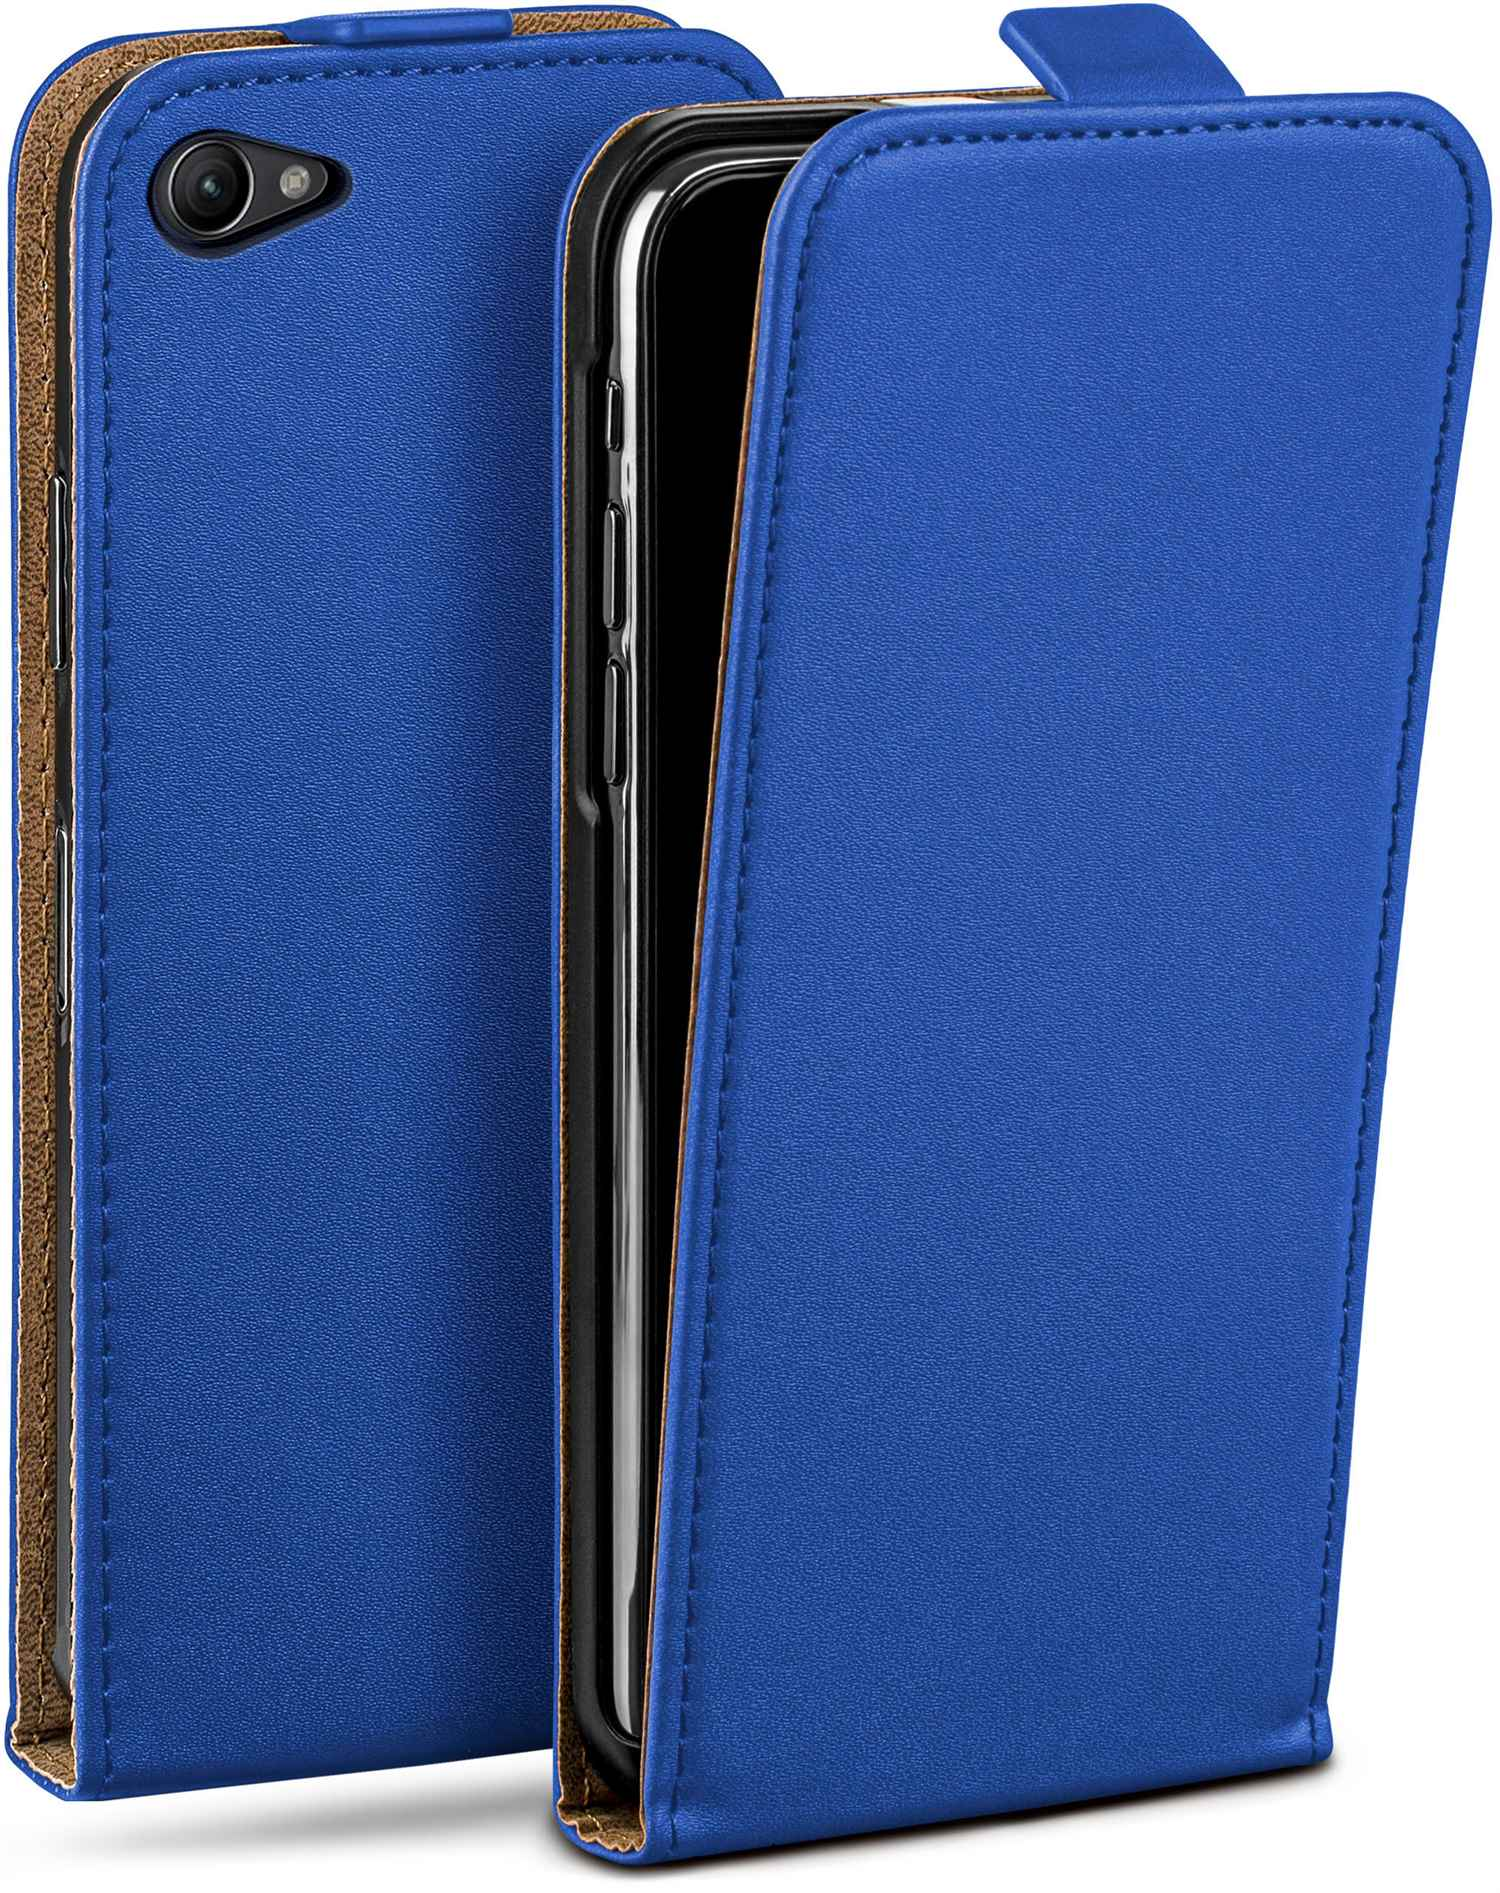 Case, Sony, Z1 Xperia Cover, Flip Royal-Blue Compact, MOEX Flip